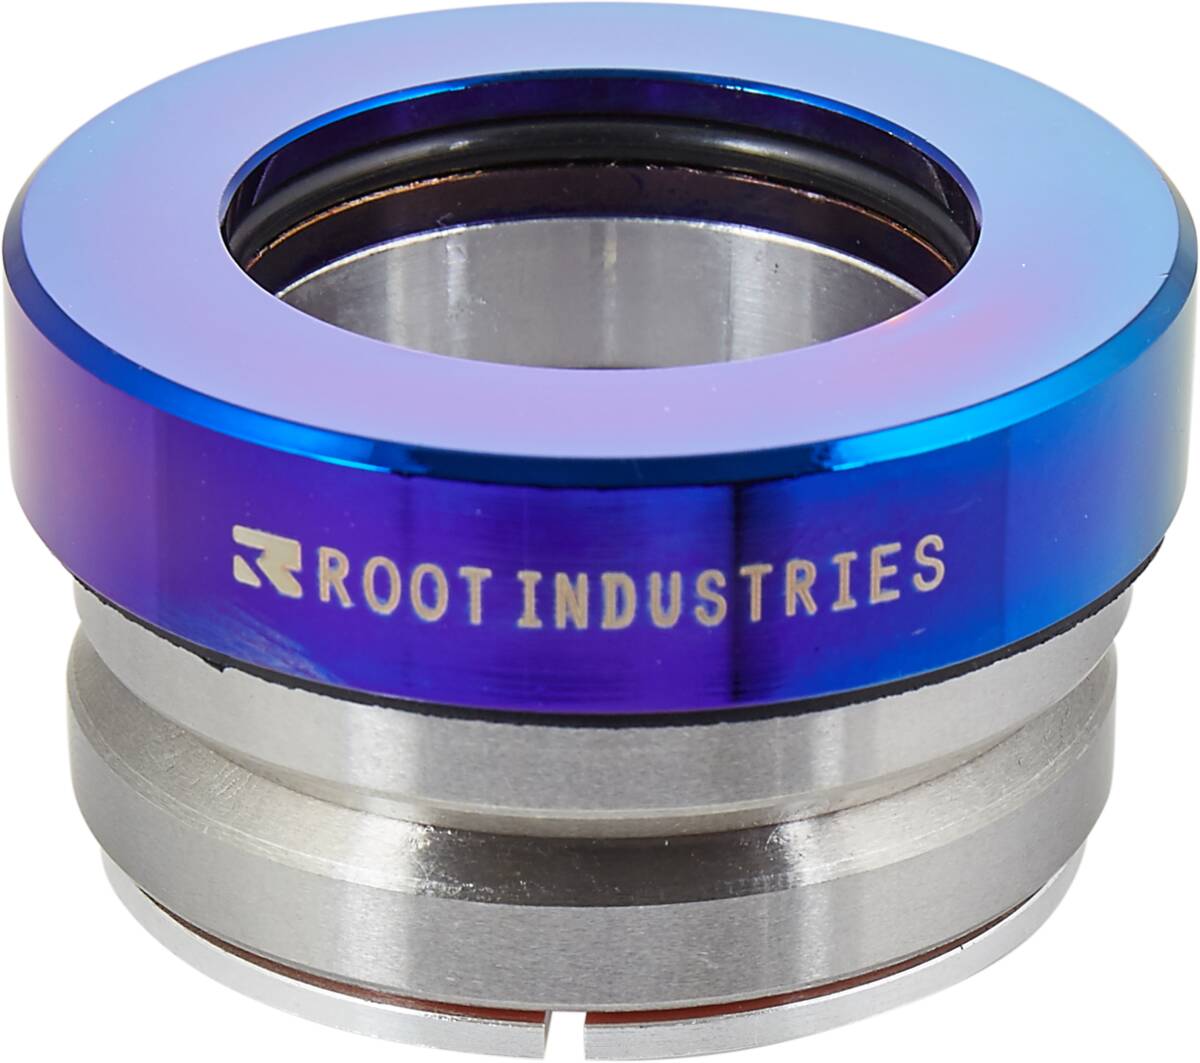 Root Industries Air Headset - Blue-ray